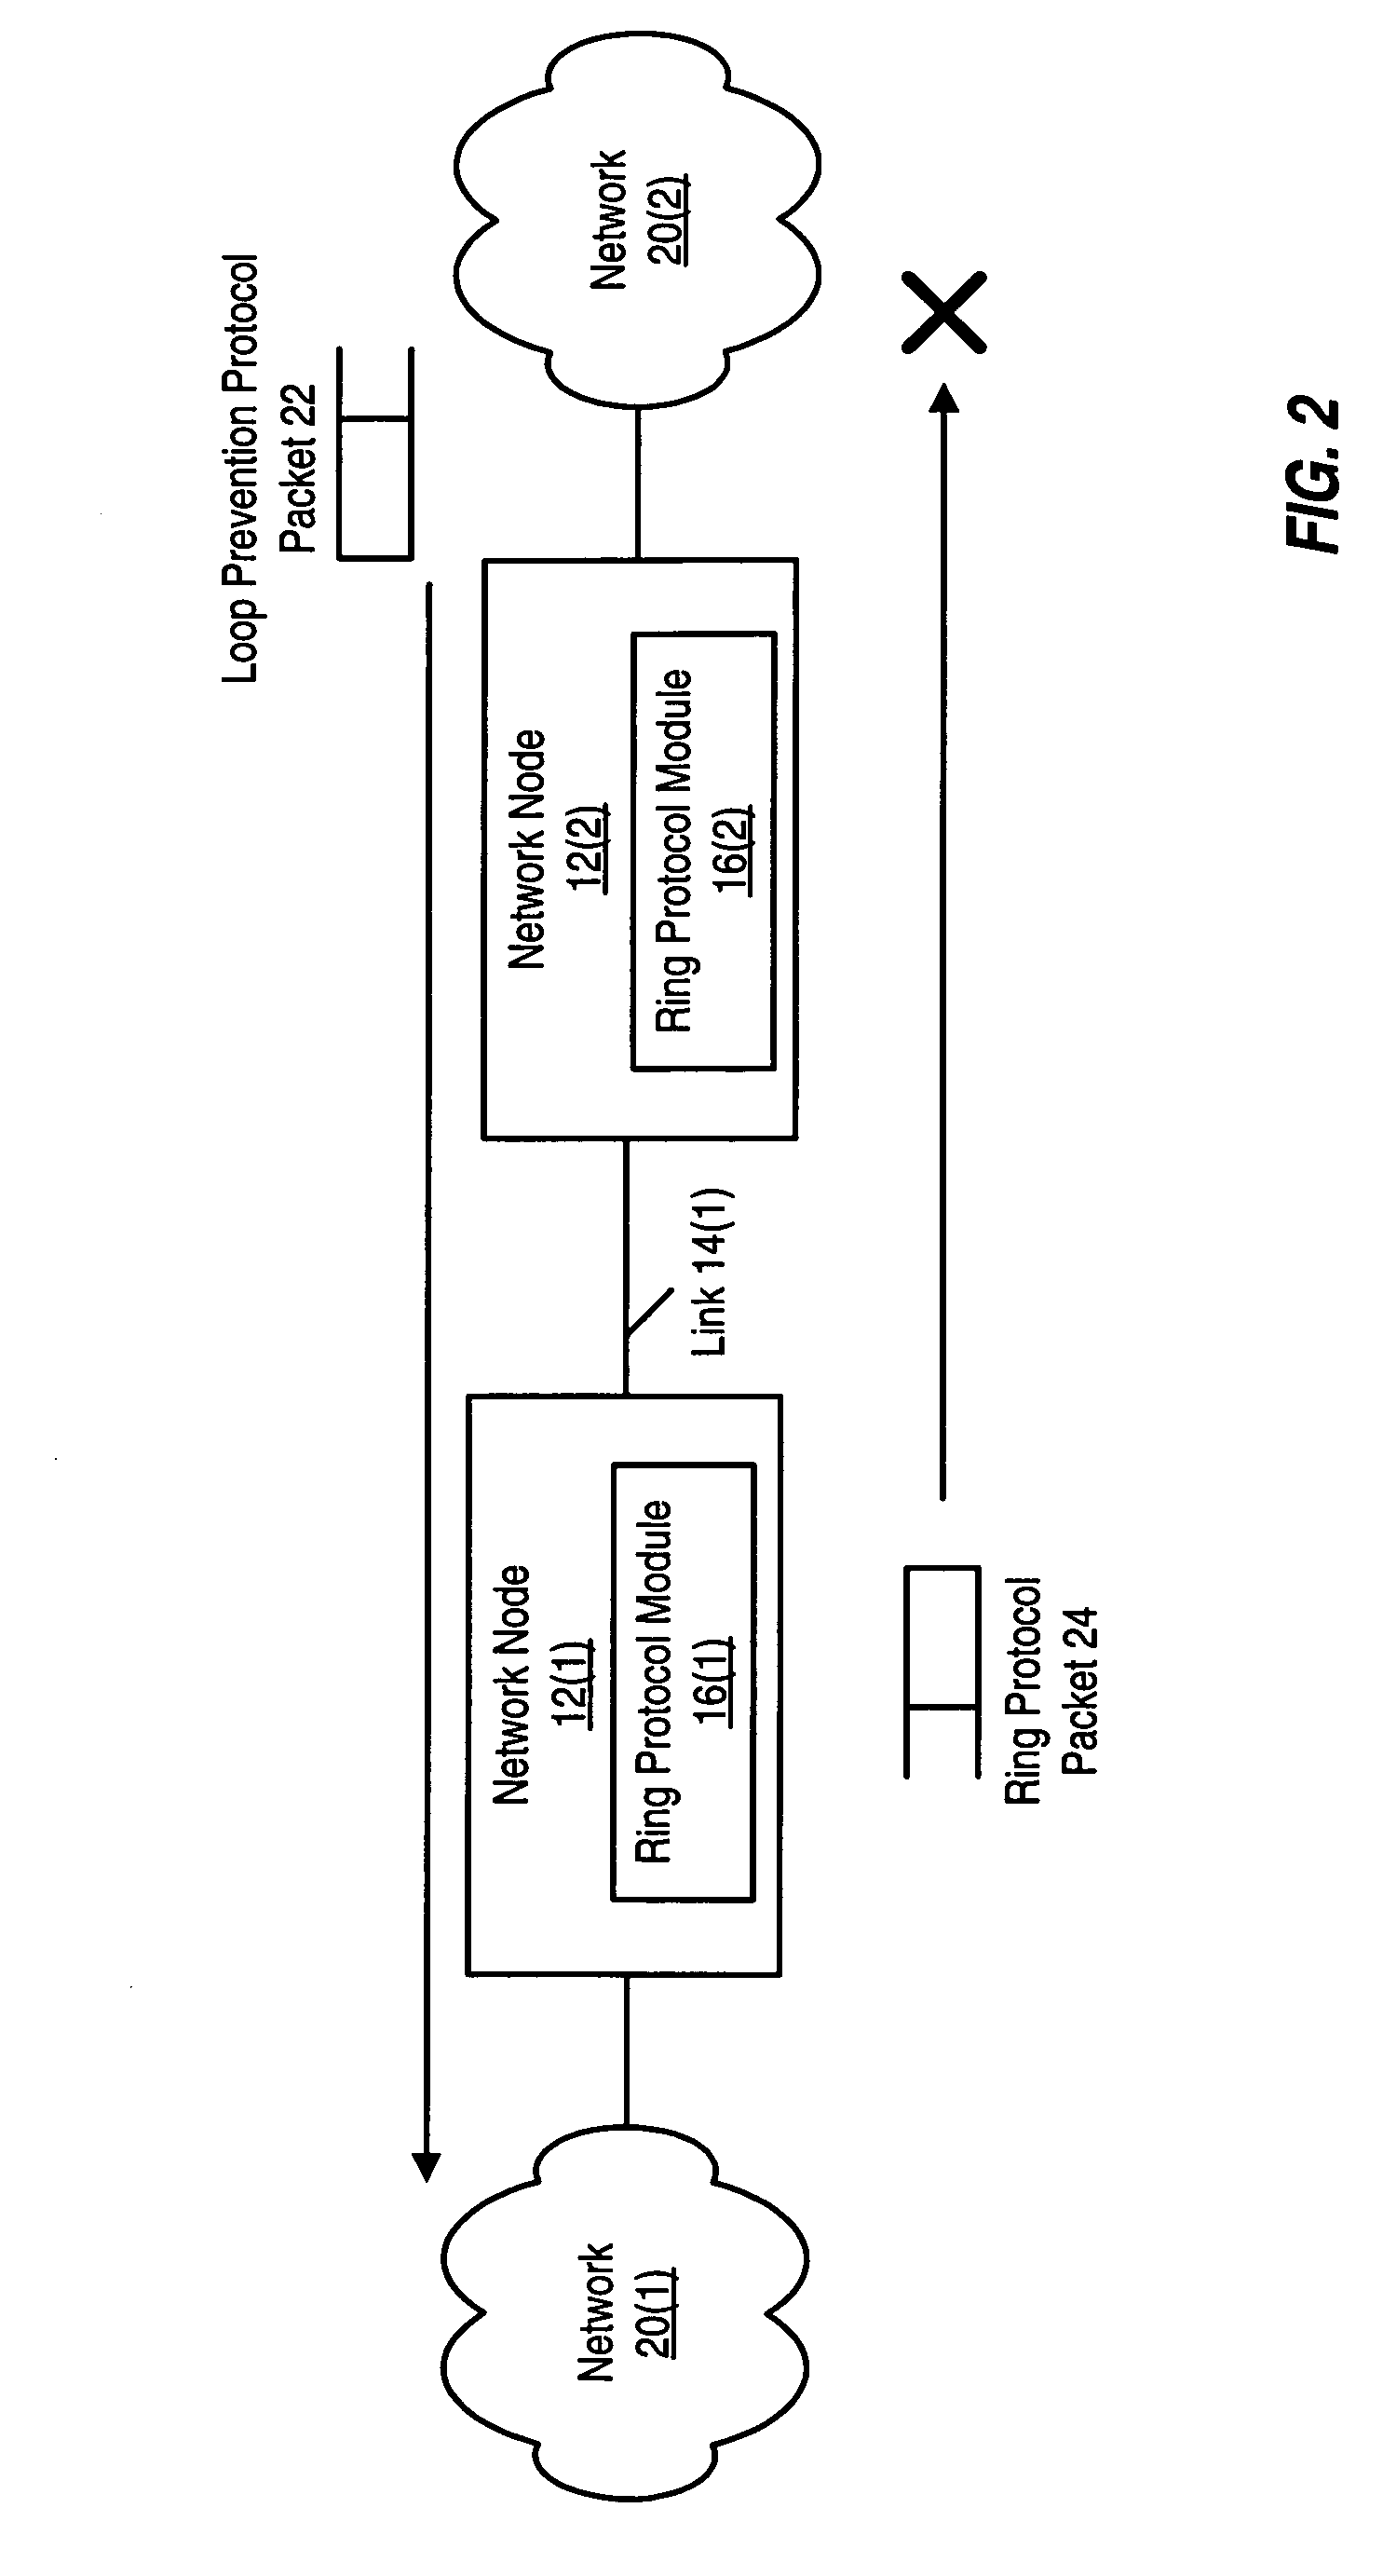 System and method for integrating ring-protocol-compatible devices into network configurations that also include non-ring-protocol compatible devices